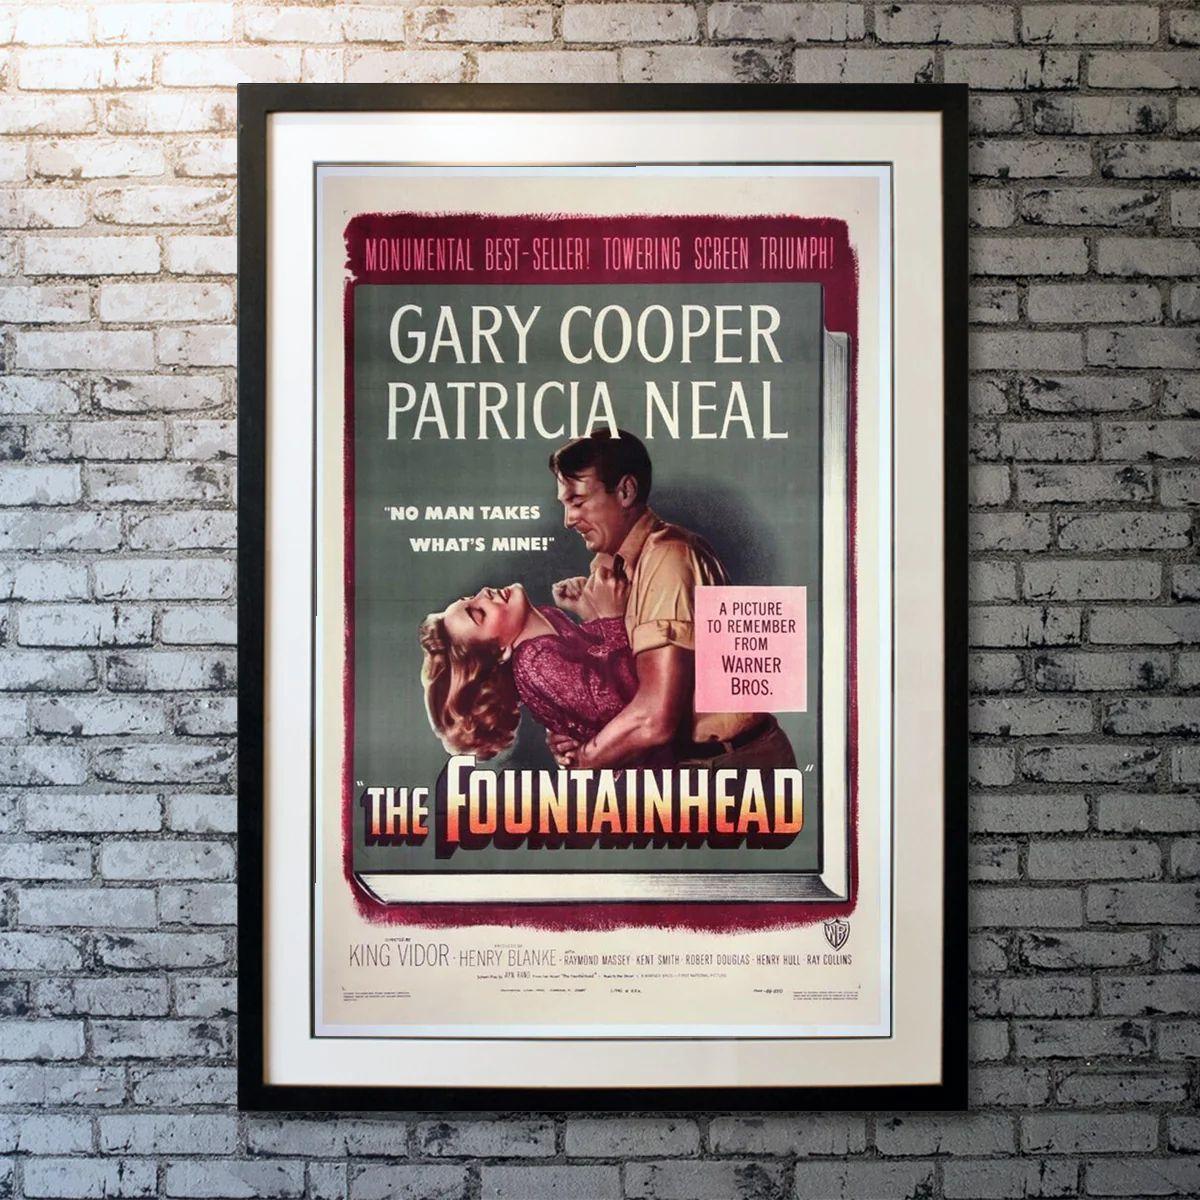 The Fountainhead, Unframed Poster, 1949

Original One Sheet (27 X 41 Inches). An uncompromising, visionary architect struggles to maintain his integrity and individualism despite personal, professional and economic pressures to conform to popular